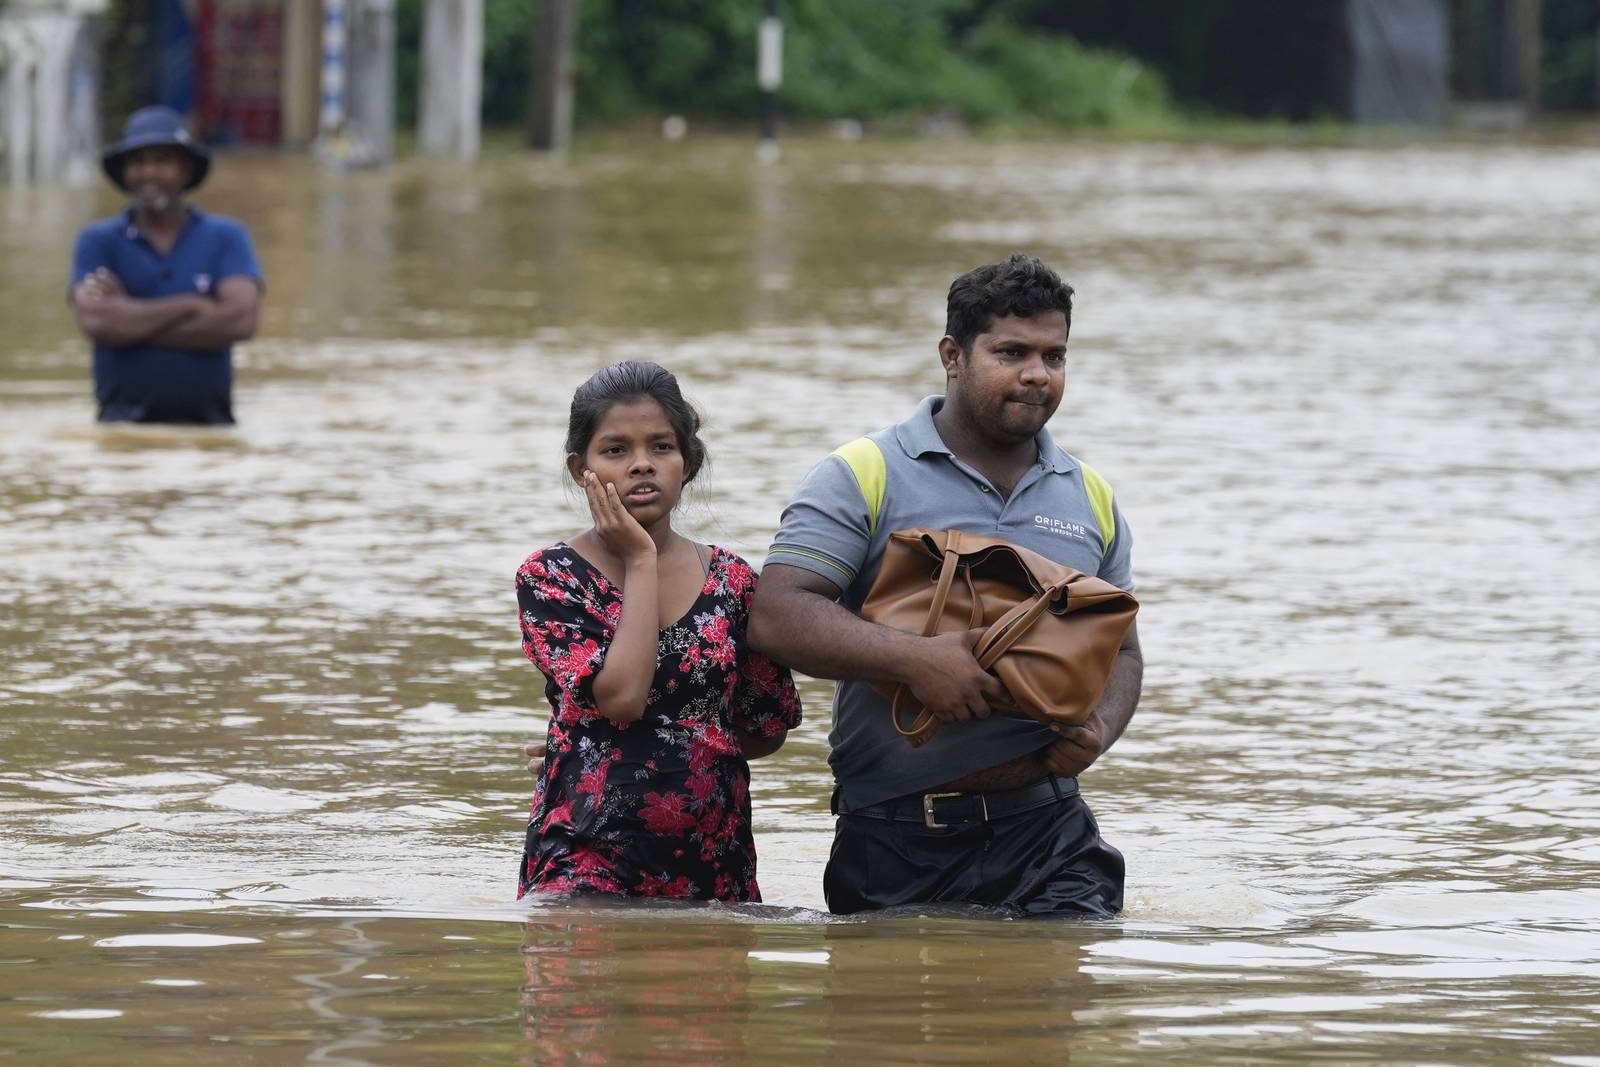 Sri Lanka closes schools as floods and mudslides leave 10 dead and 6